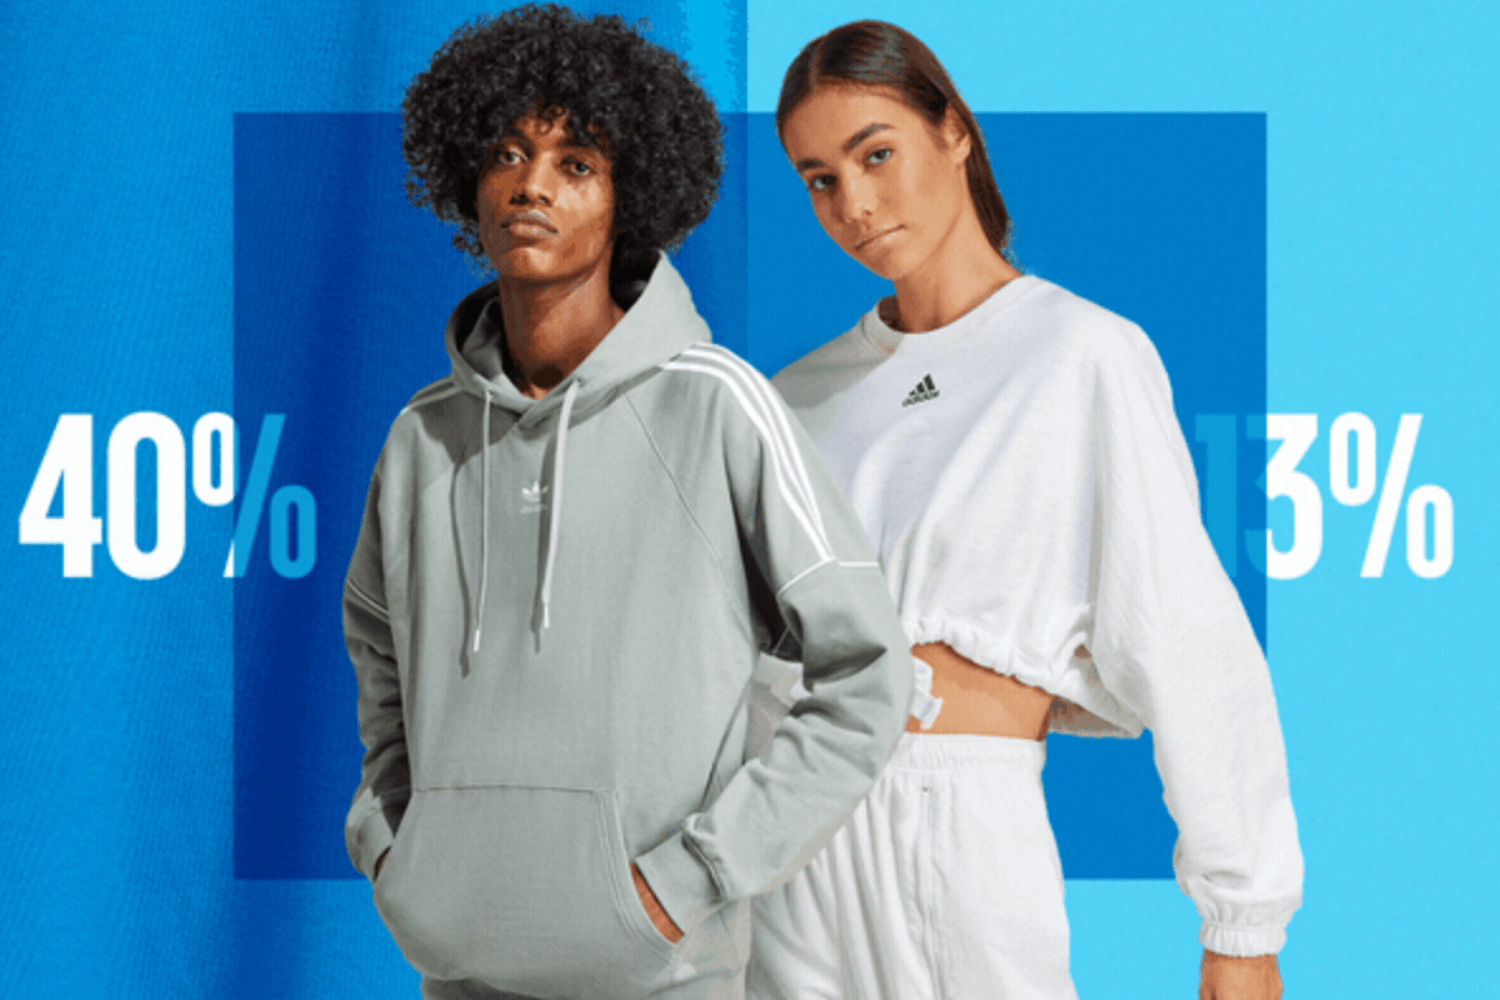 The mid-season sale at adidas with up to 40% off